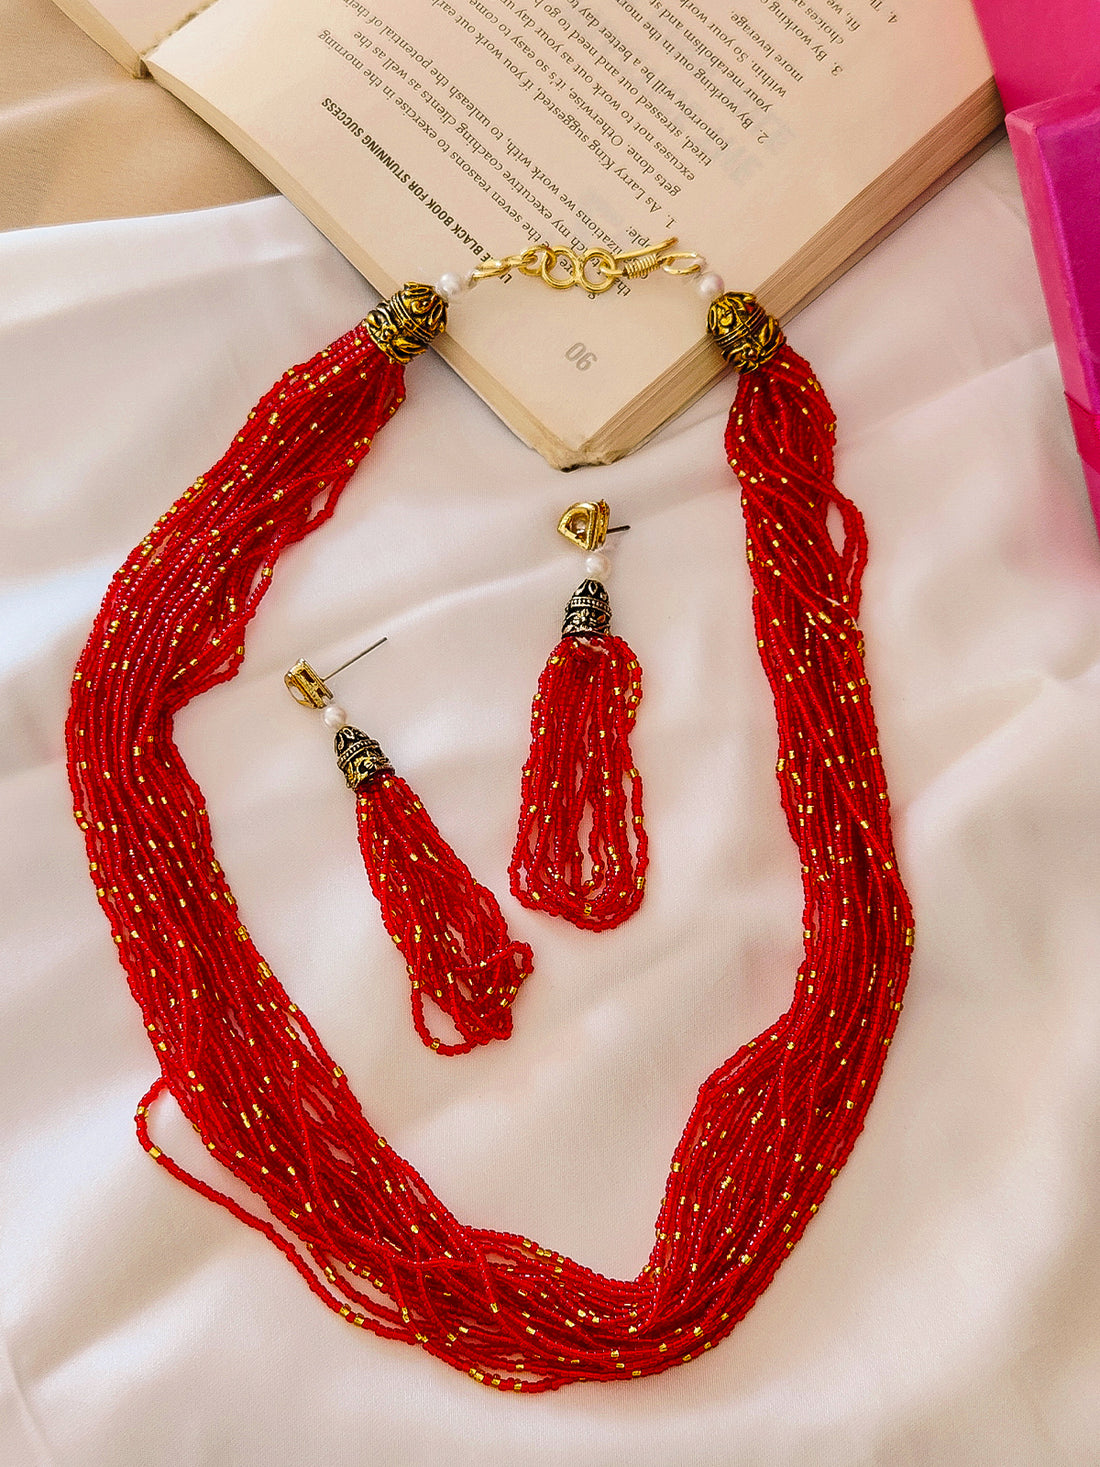 Moti Jhalar Necklace Set | Red-colour Beads Necklace & Earrings for Parties & Office Going Women from House of Mrigaya by Nandini-Red - Mrigaya India